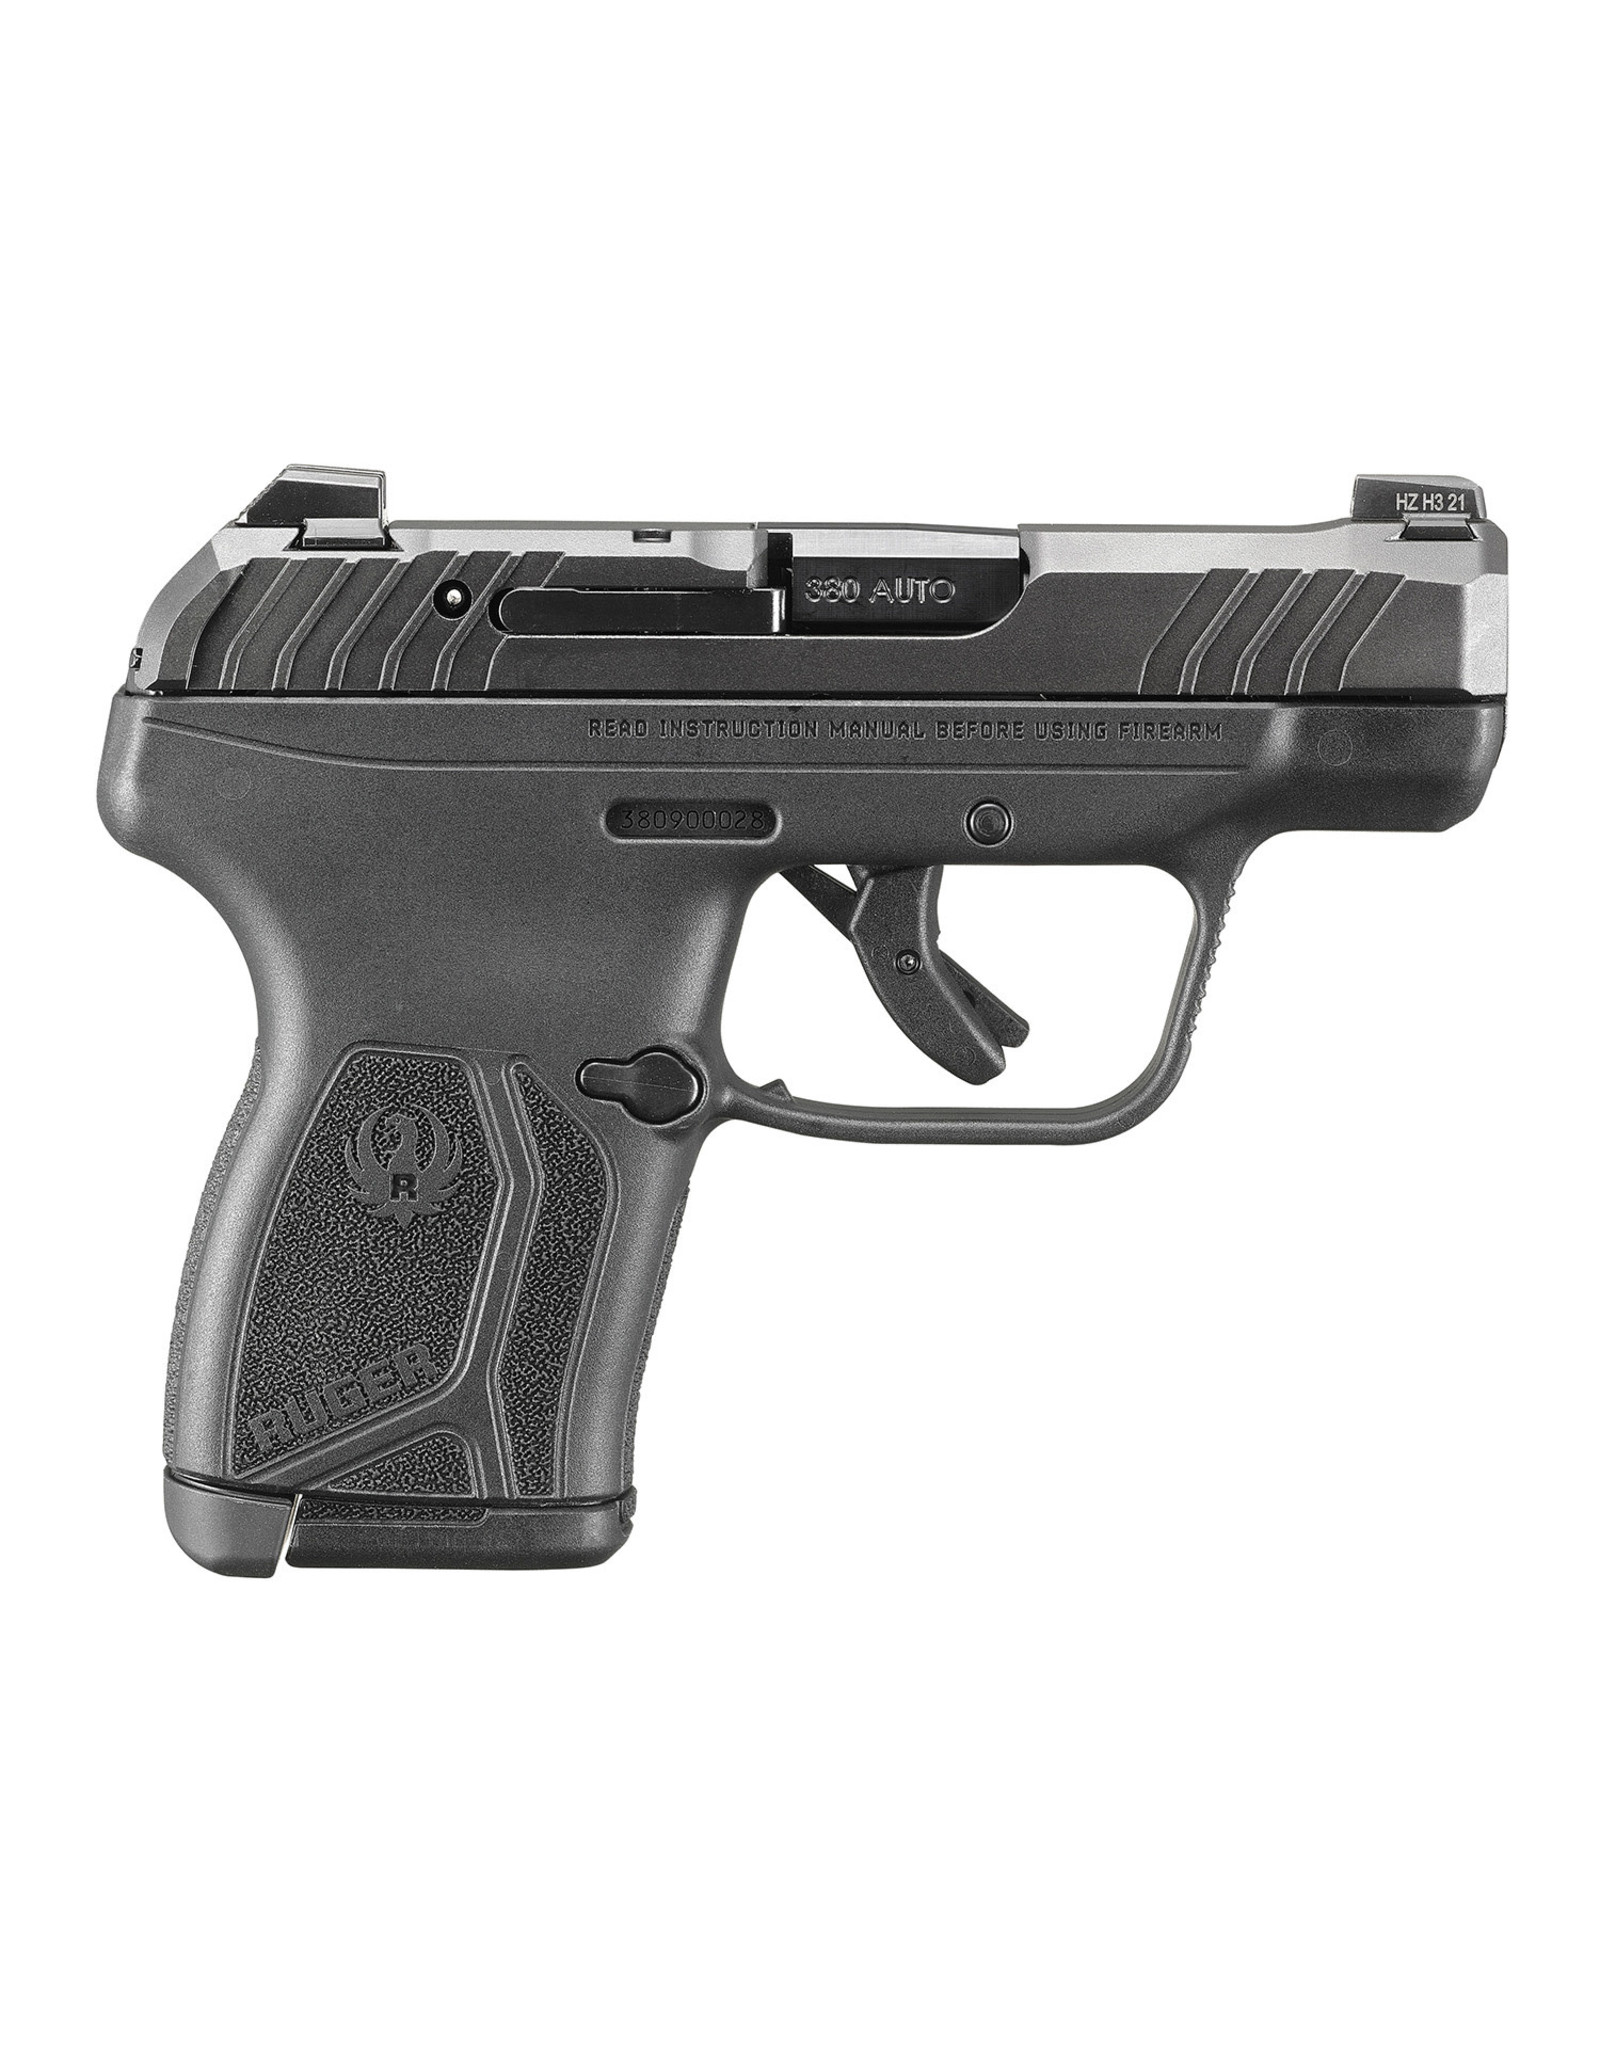 Ruger LCP Max .380 ACP 10+1 Round 2.8" bbl